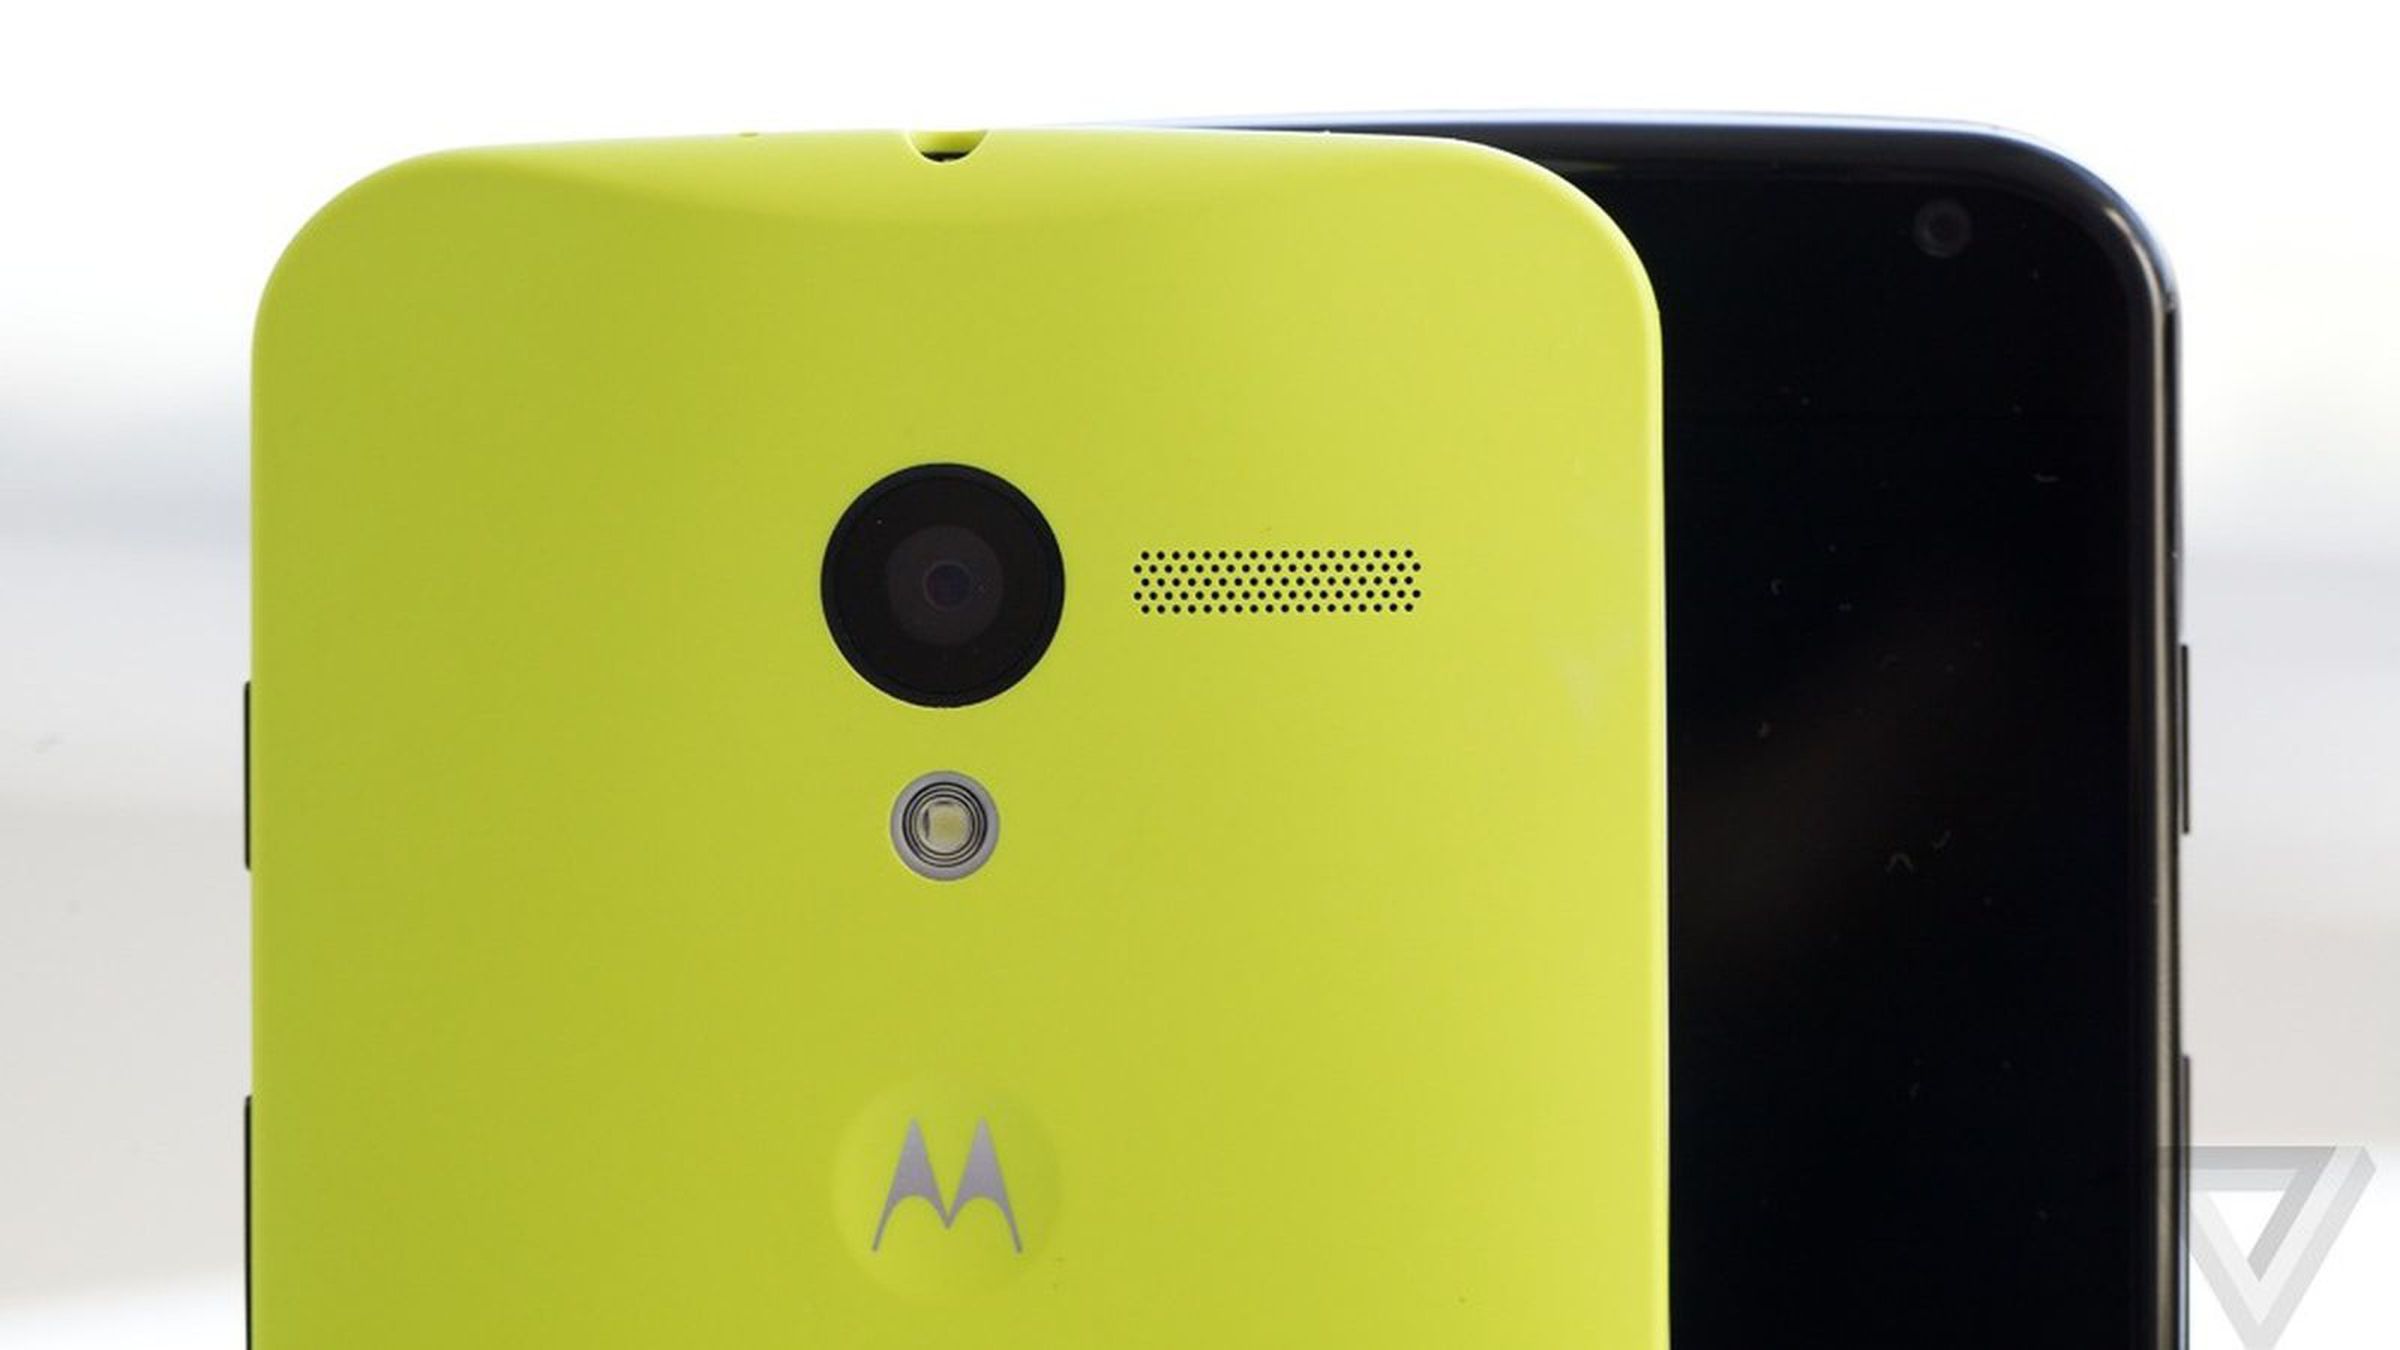 Google completed its acquisition of Motorola Mobility in 2012. Two years later, it offloaded the company to Lenovo.